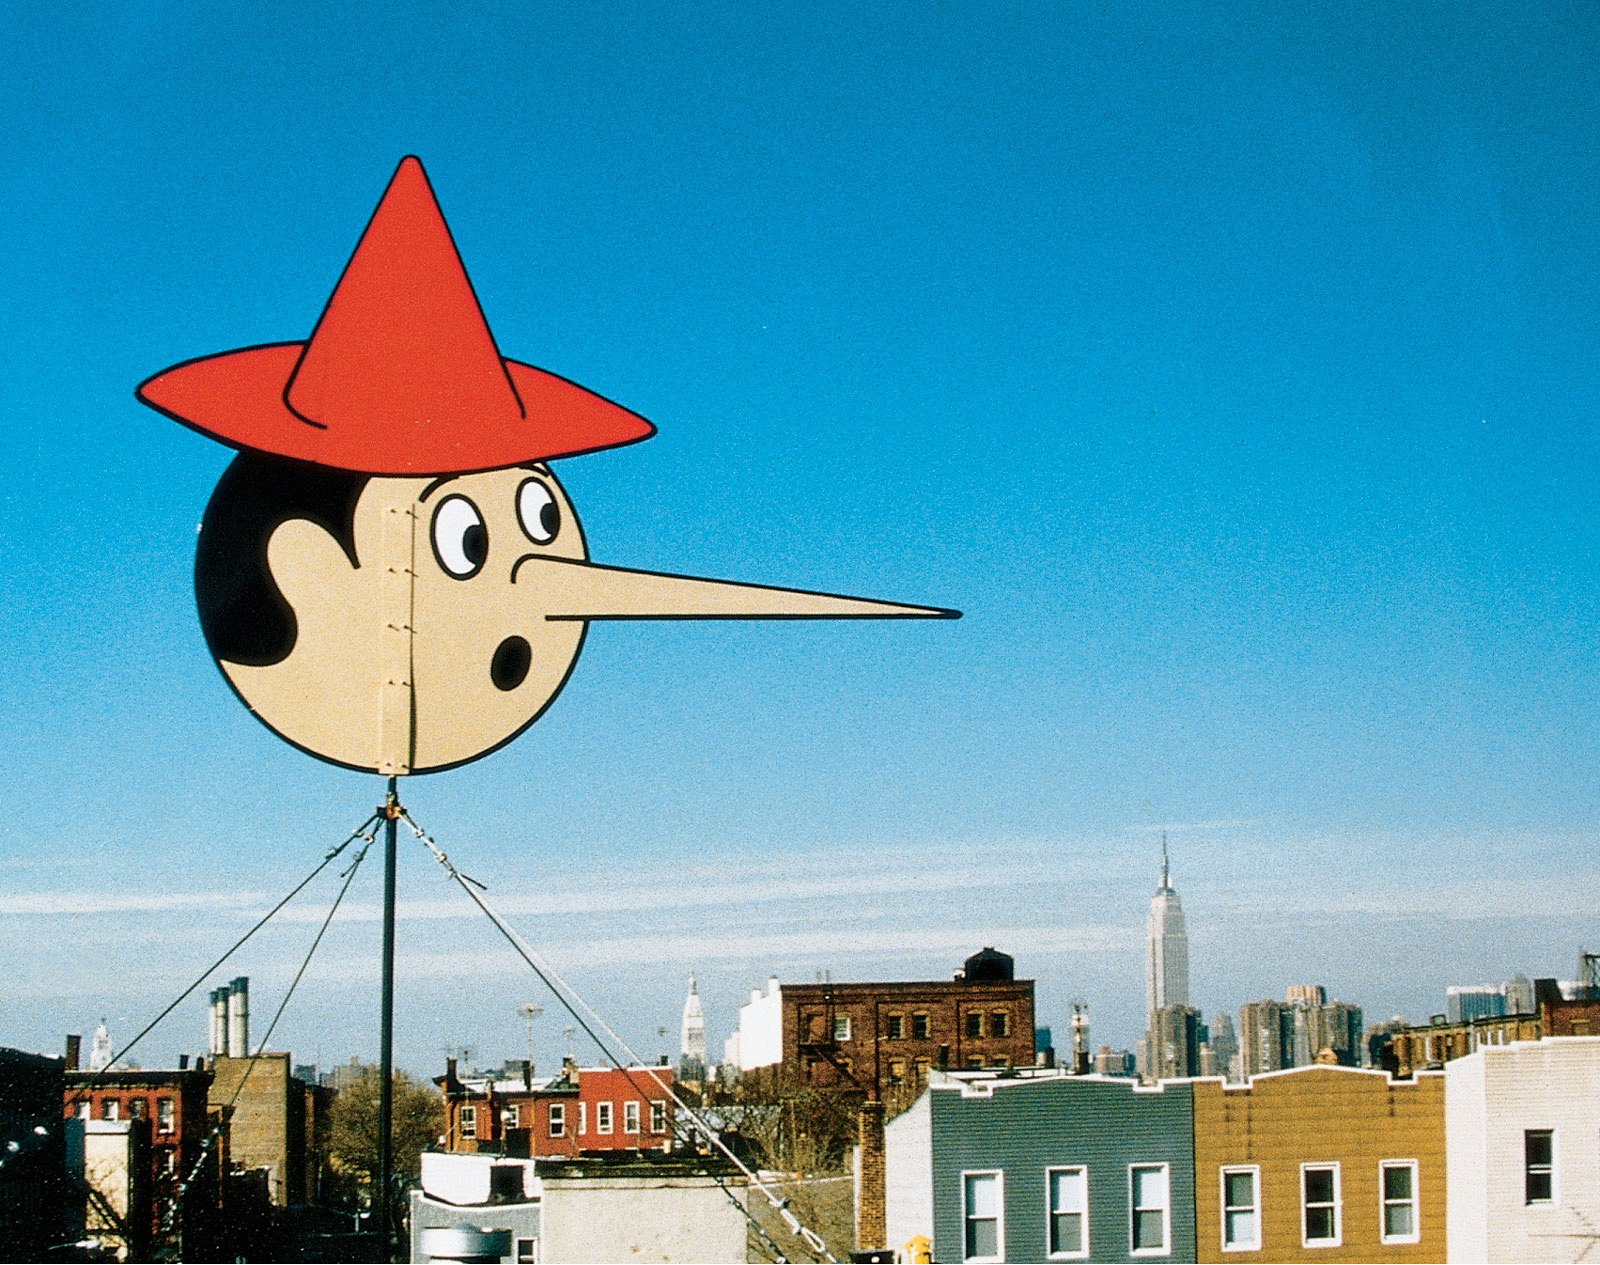 A postcard project by artist Michael Ballou featuring a photograph of his Pinocchio-themed weather vane.